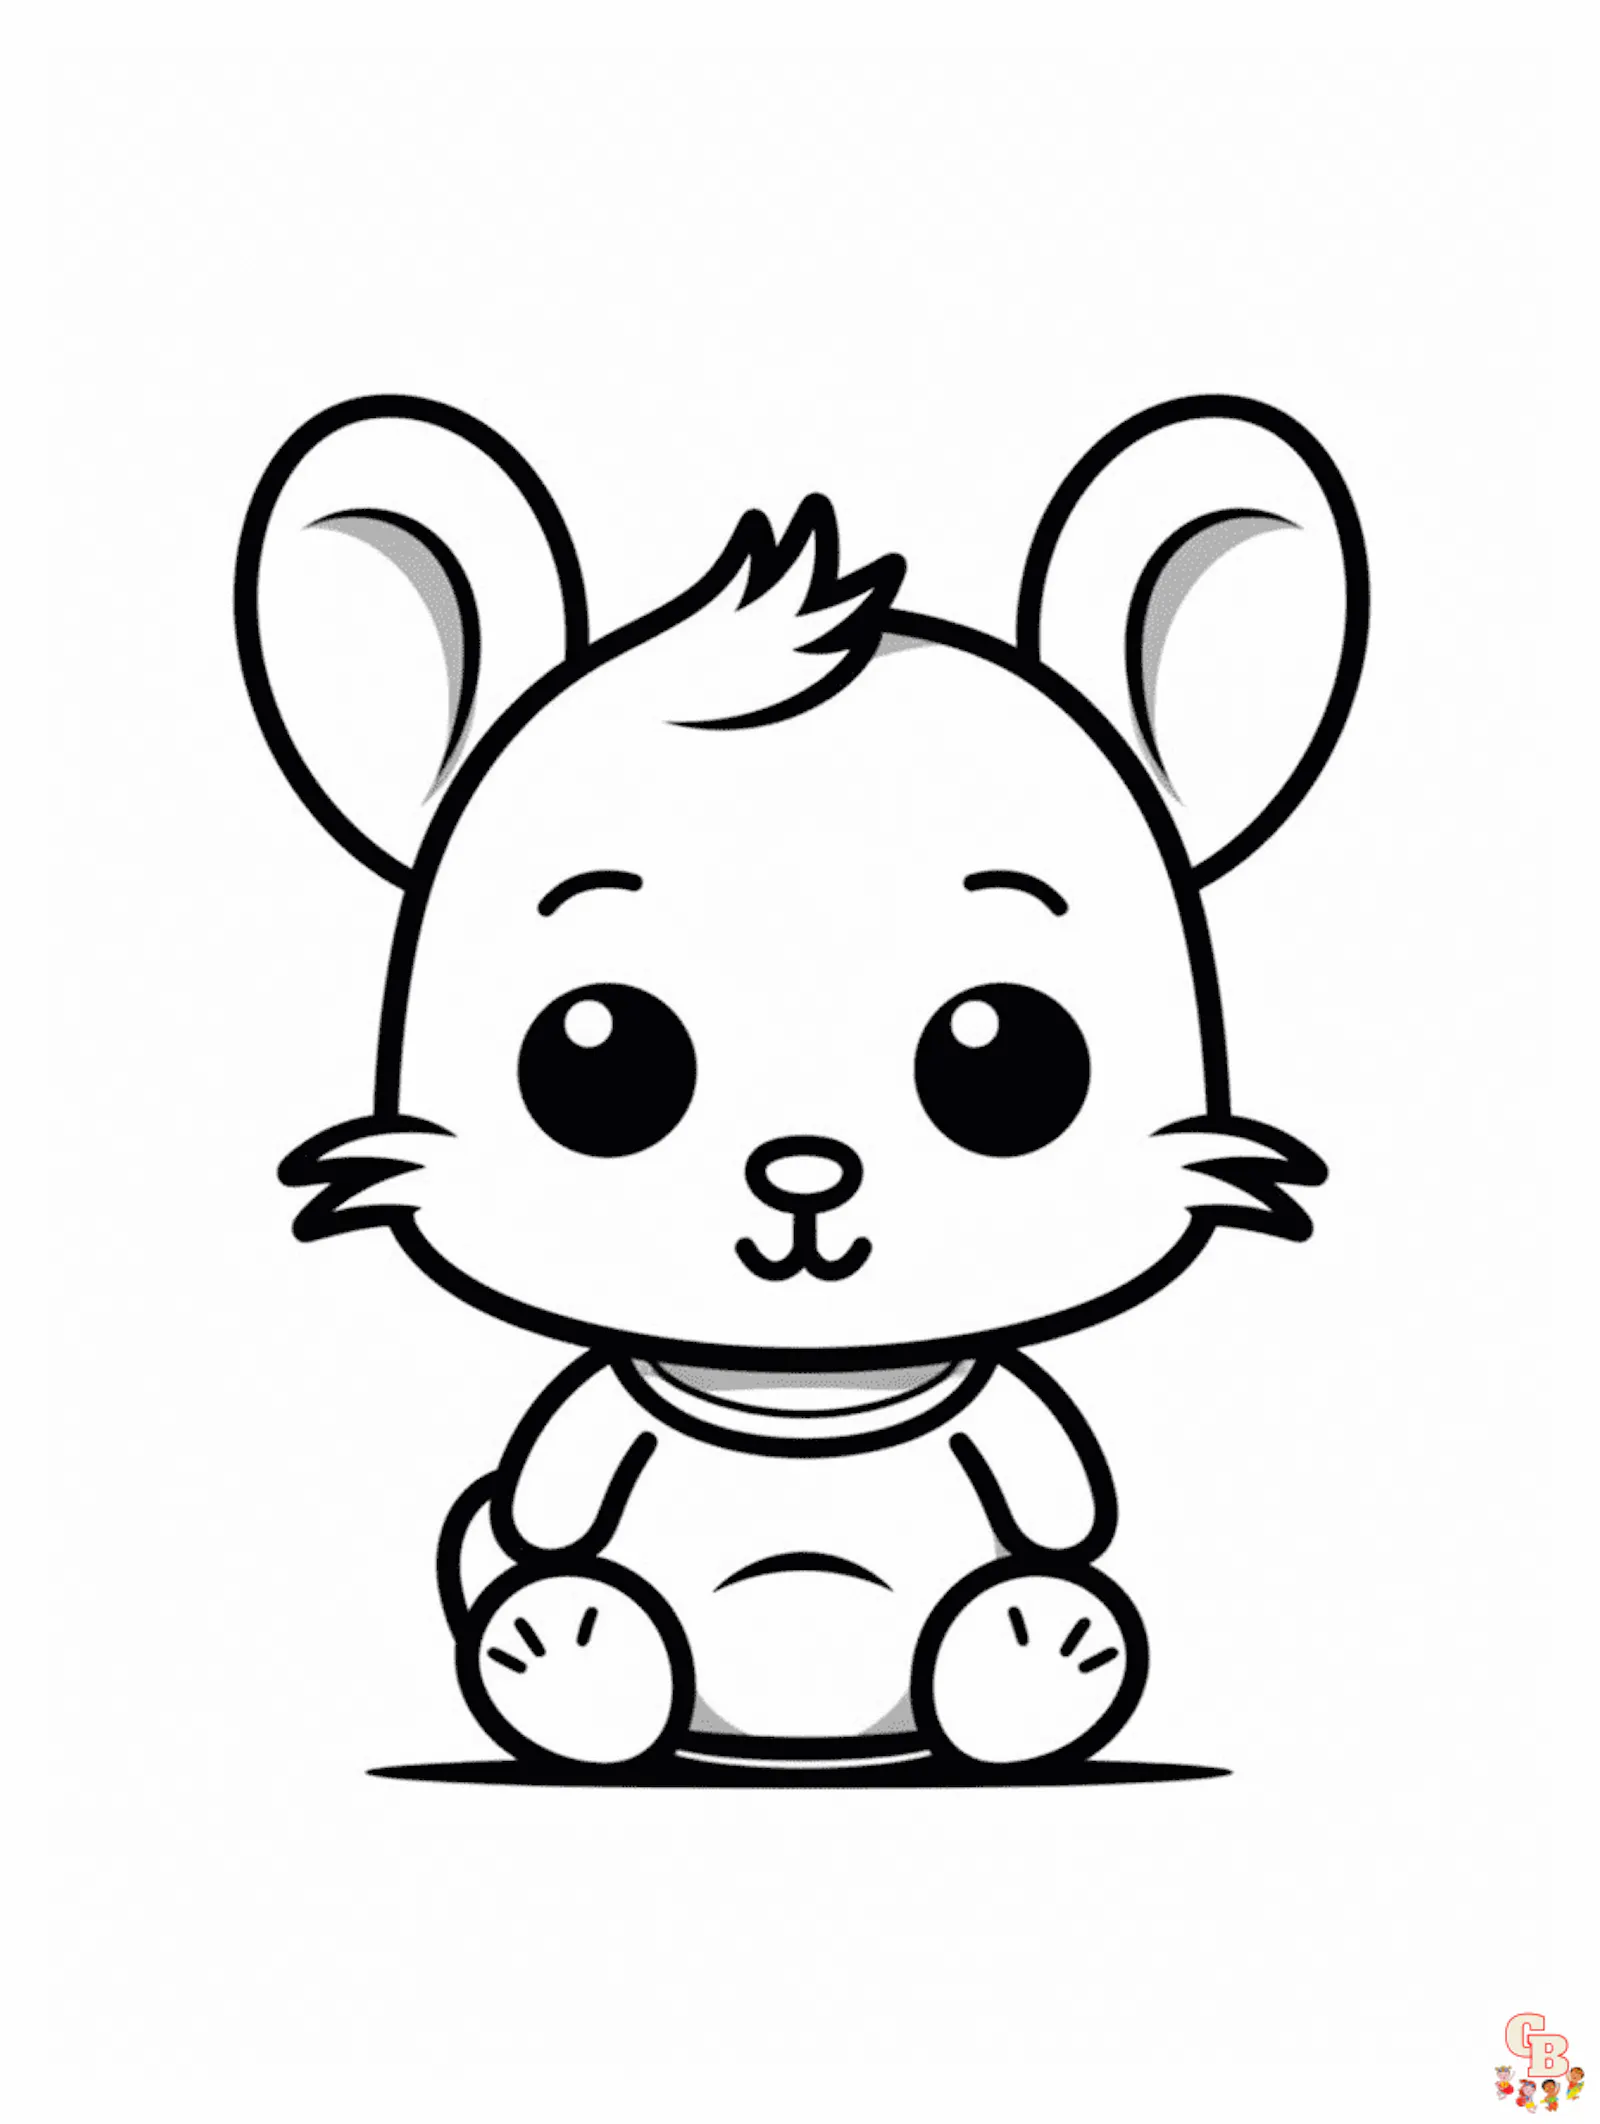 Discover the Adorable World: Free Printable Kawaii Coloring Pages